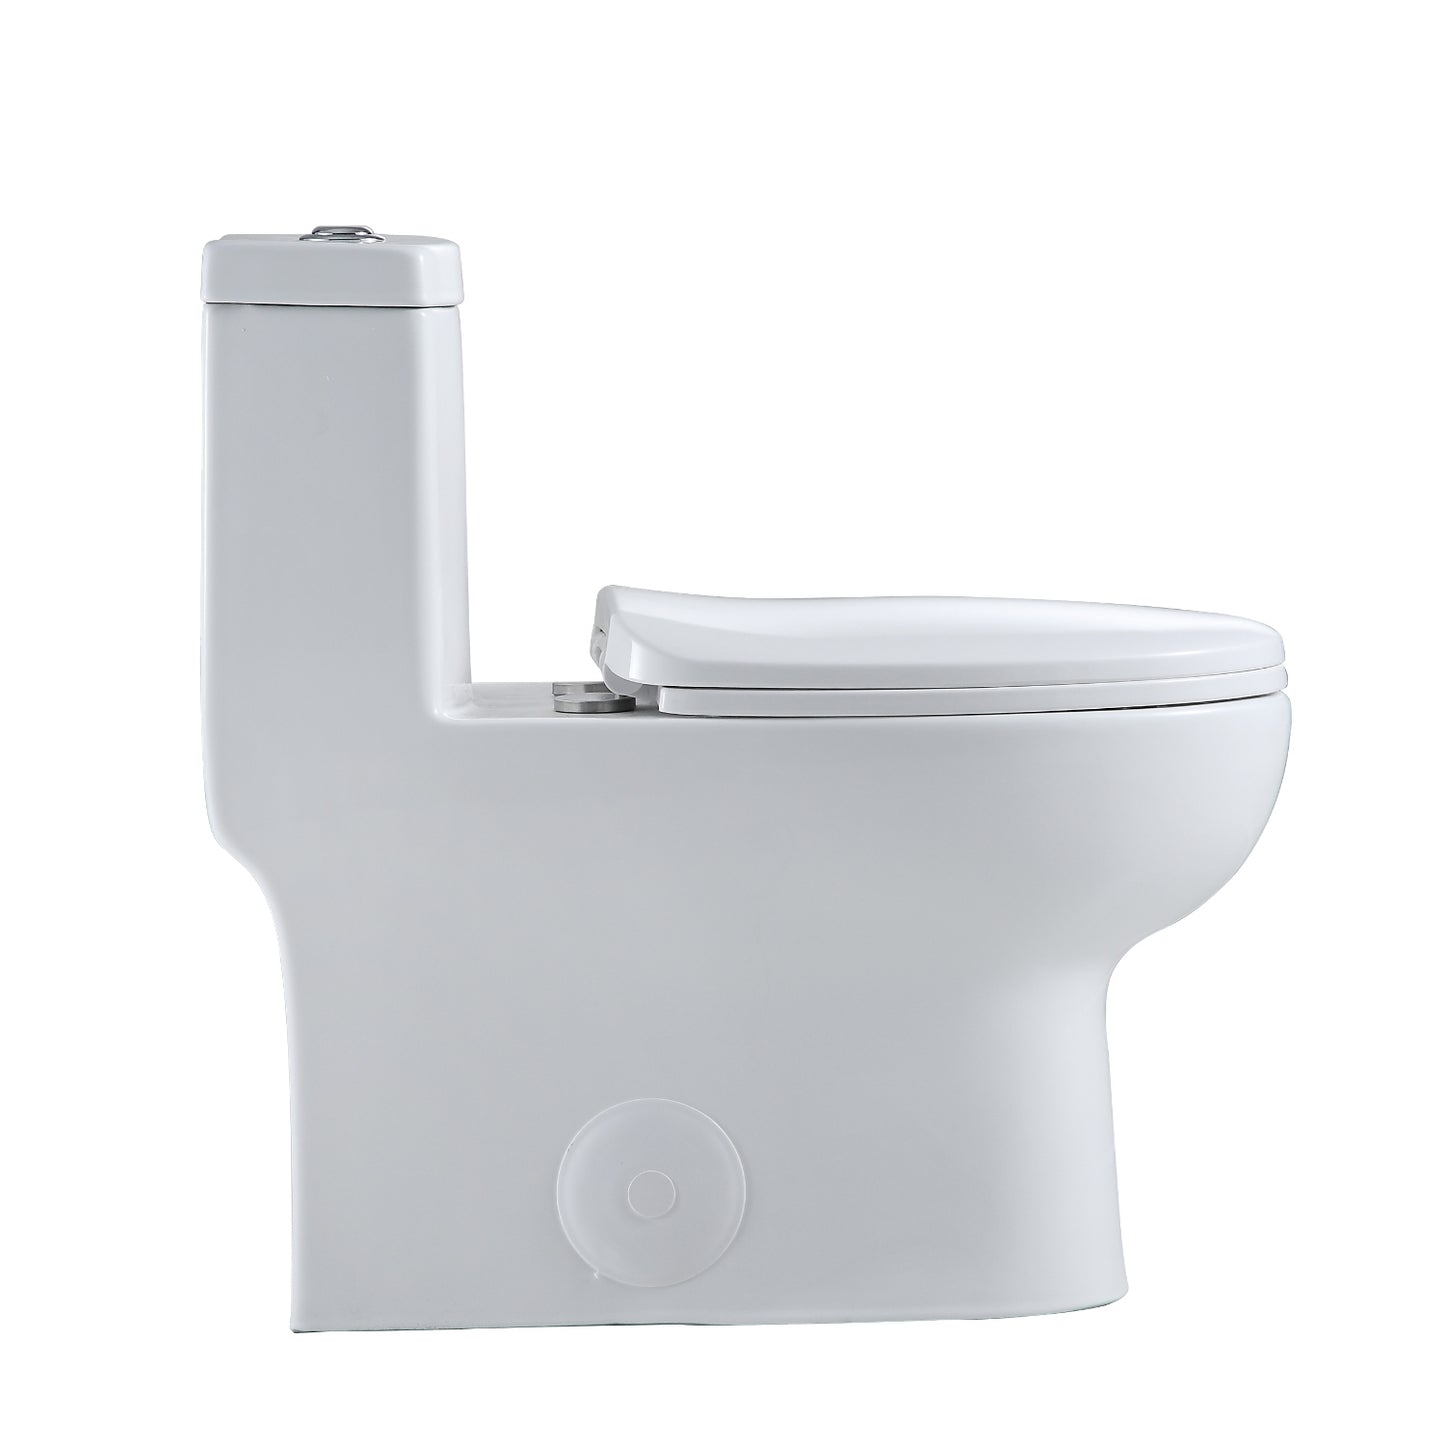 Venezia One-Piece Toilet by Altair Dual Top Flush, Elongated, Skirted T276